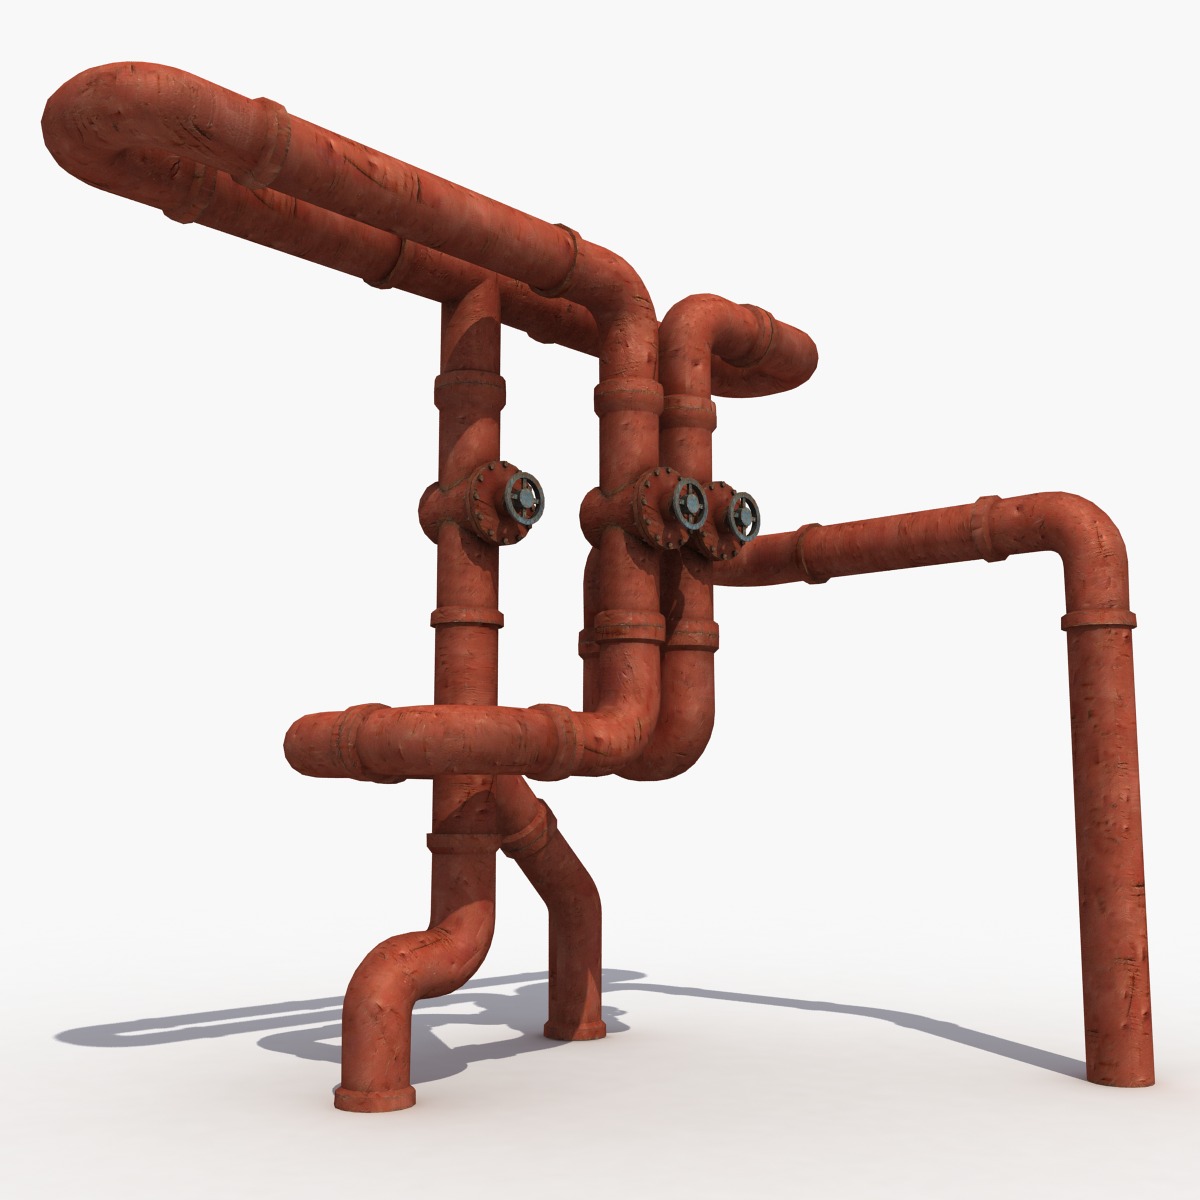 Constructor Pipe System